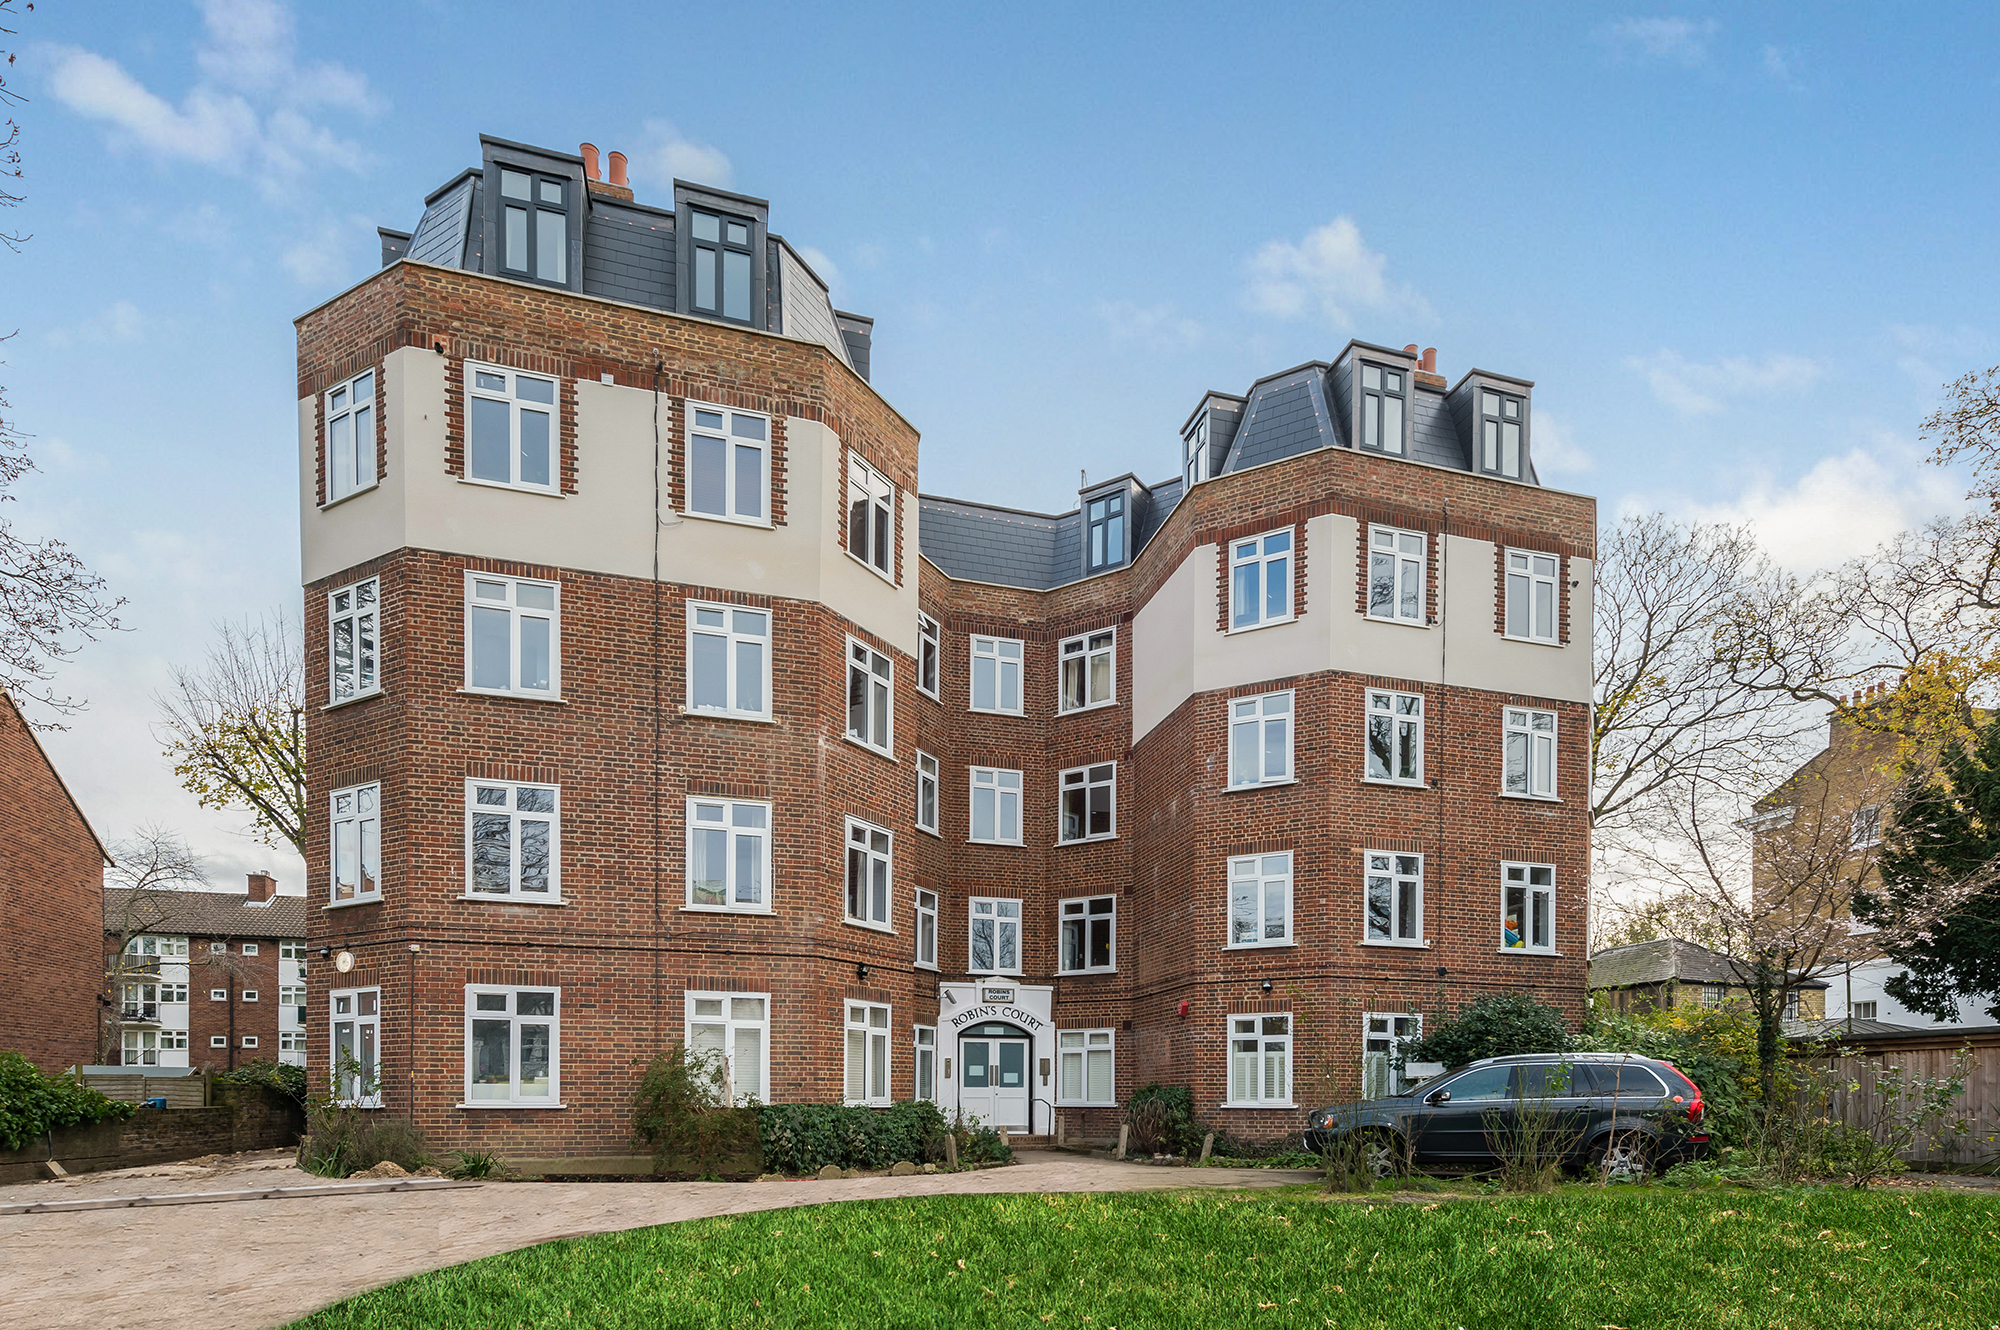 Exterior view of Robins Court in Clapham, after works